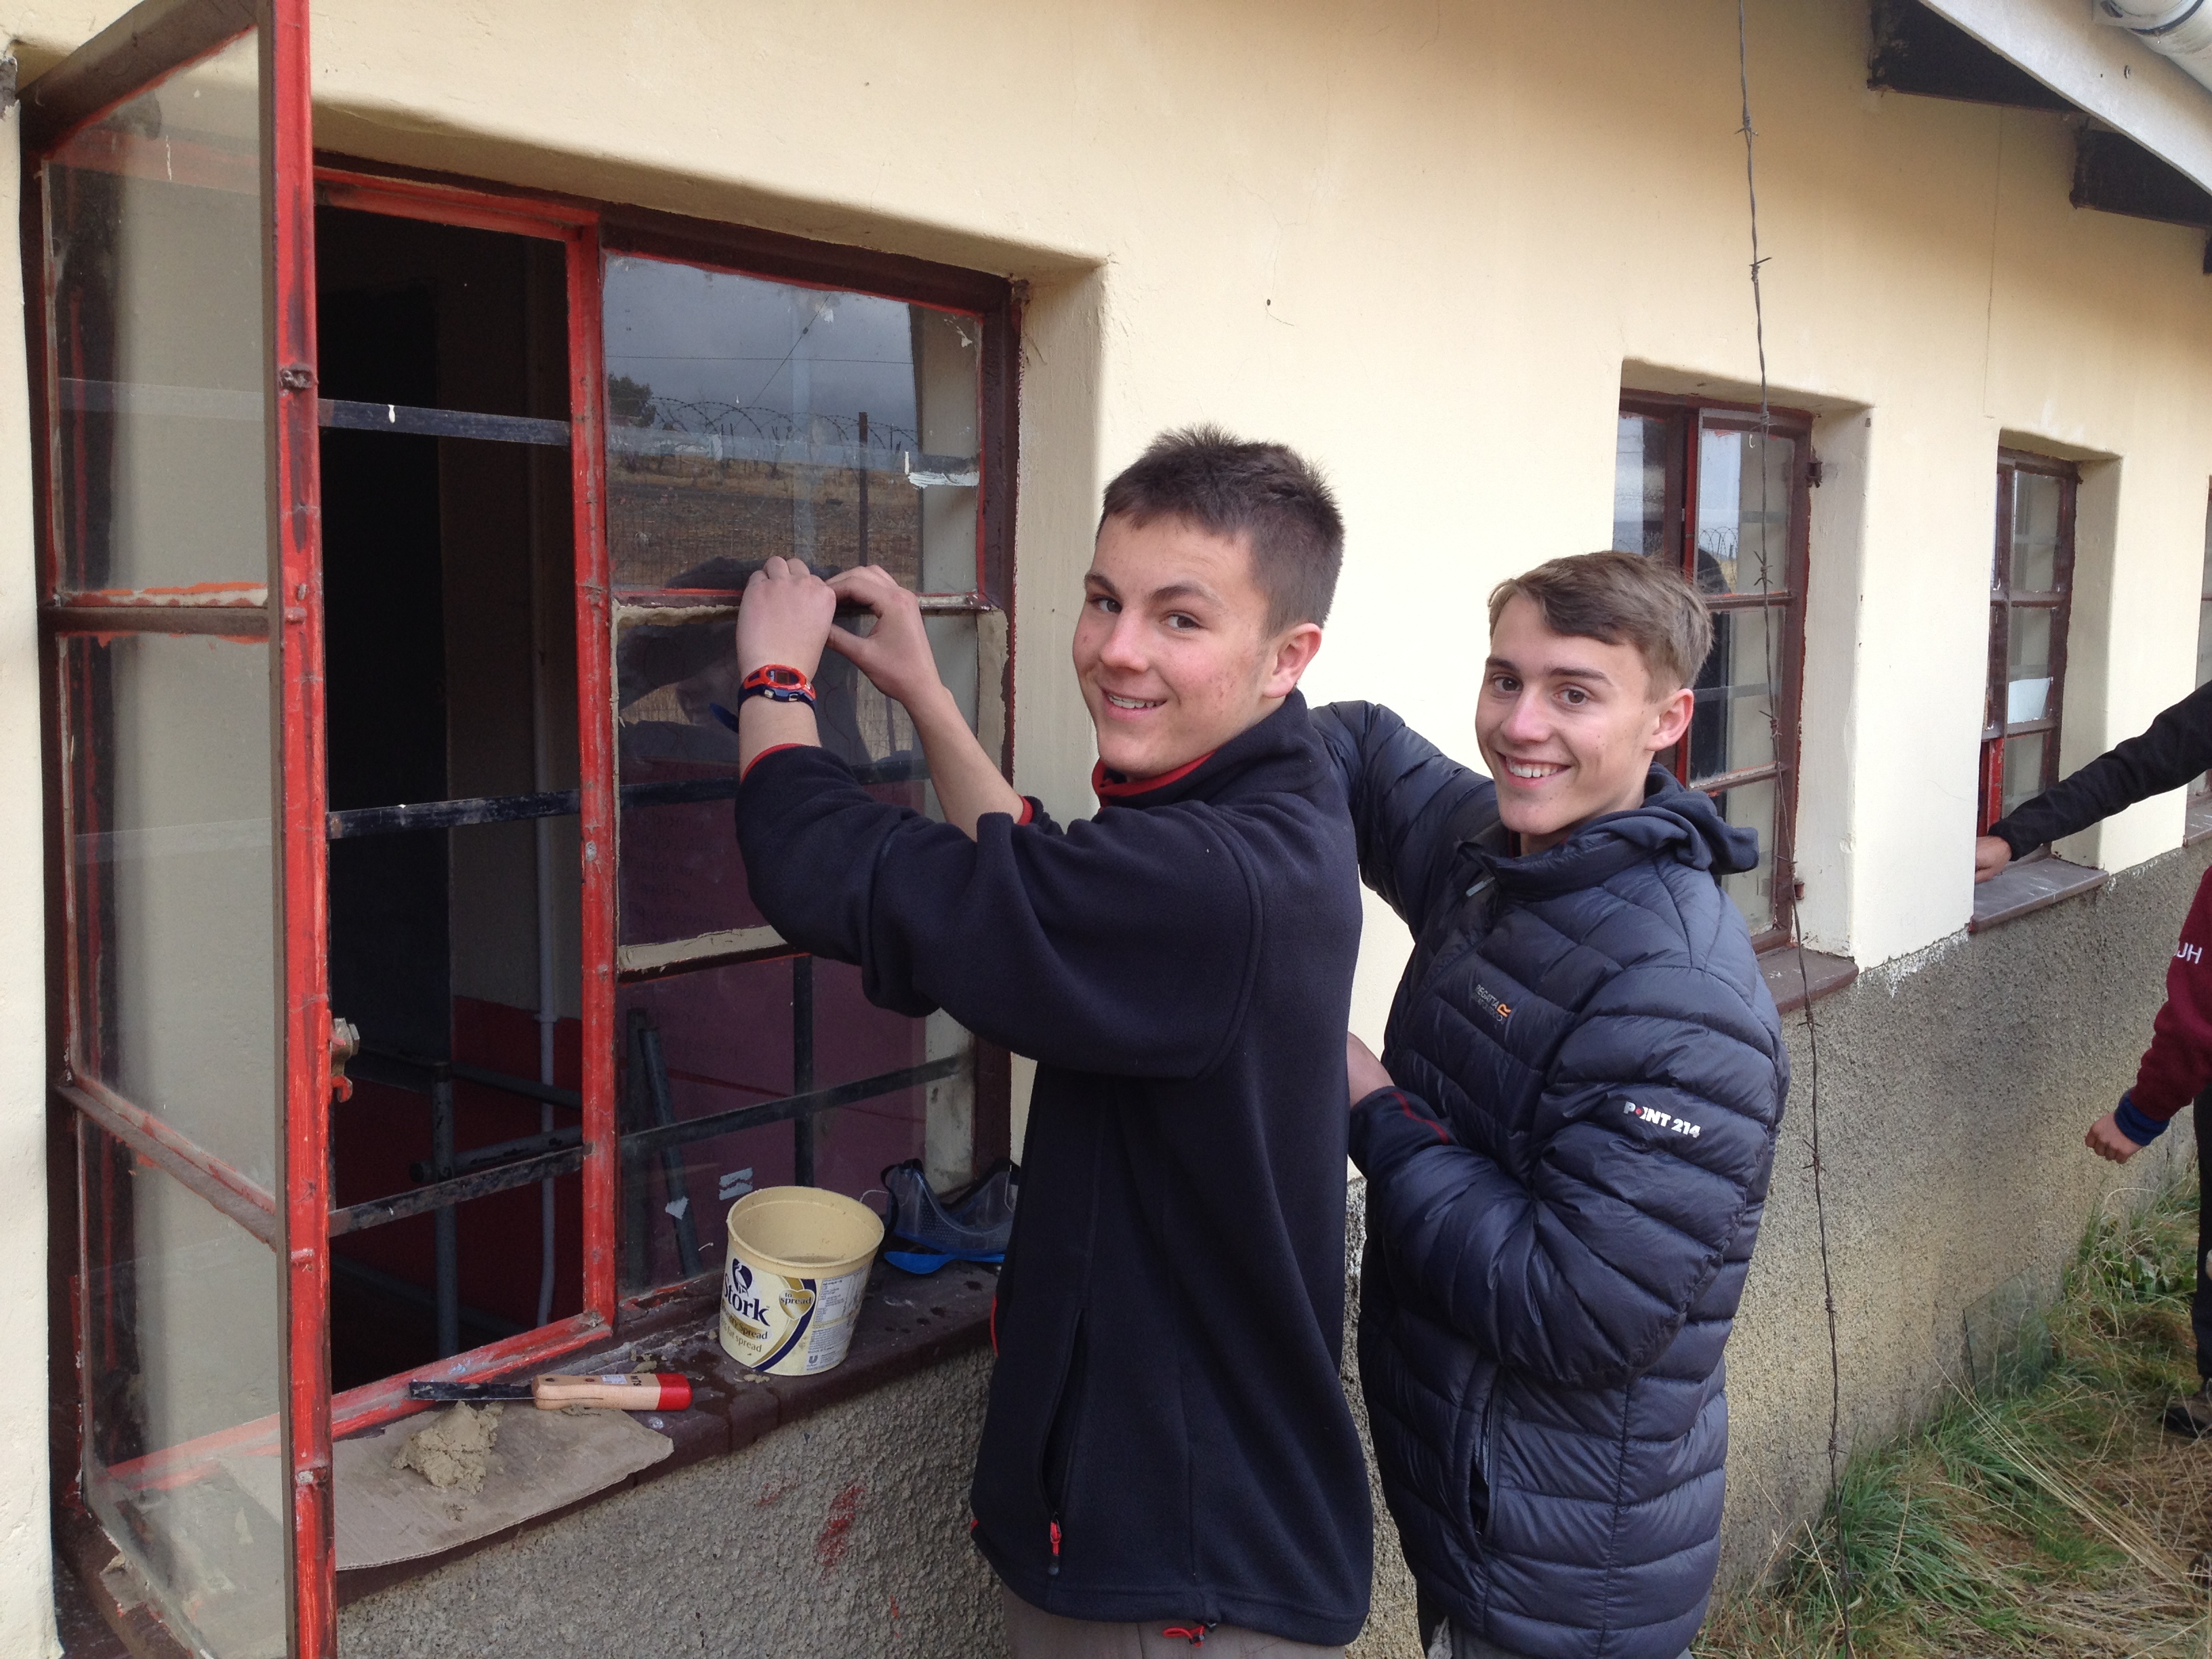 Ben Davis and Fraser Merrick replacing one of the 27 broken windows fixed by the group in a local school